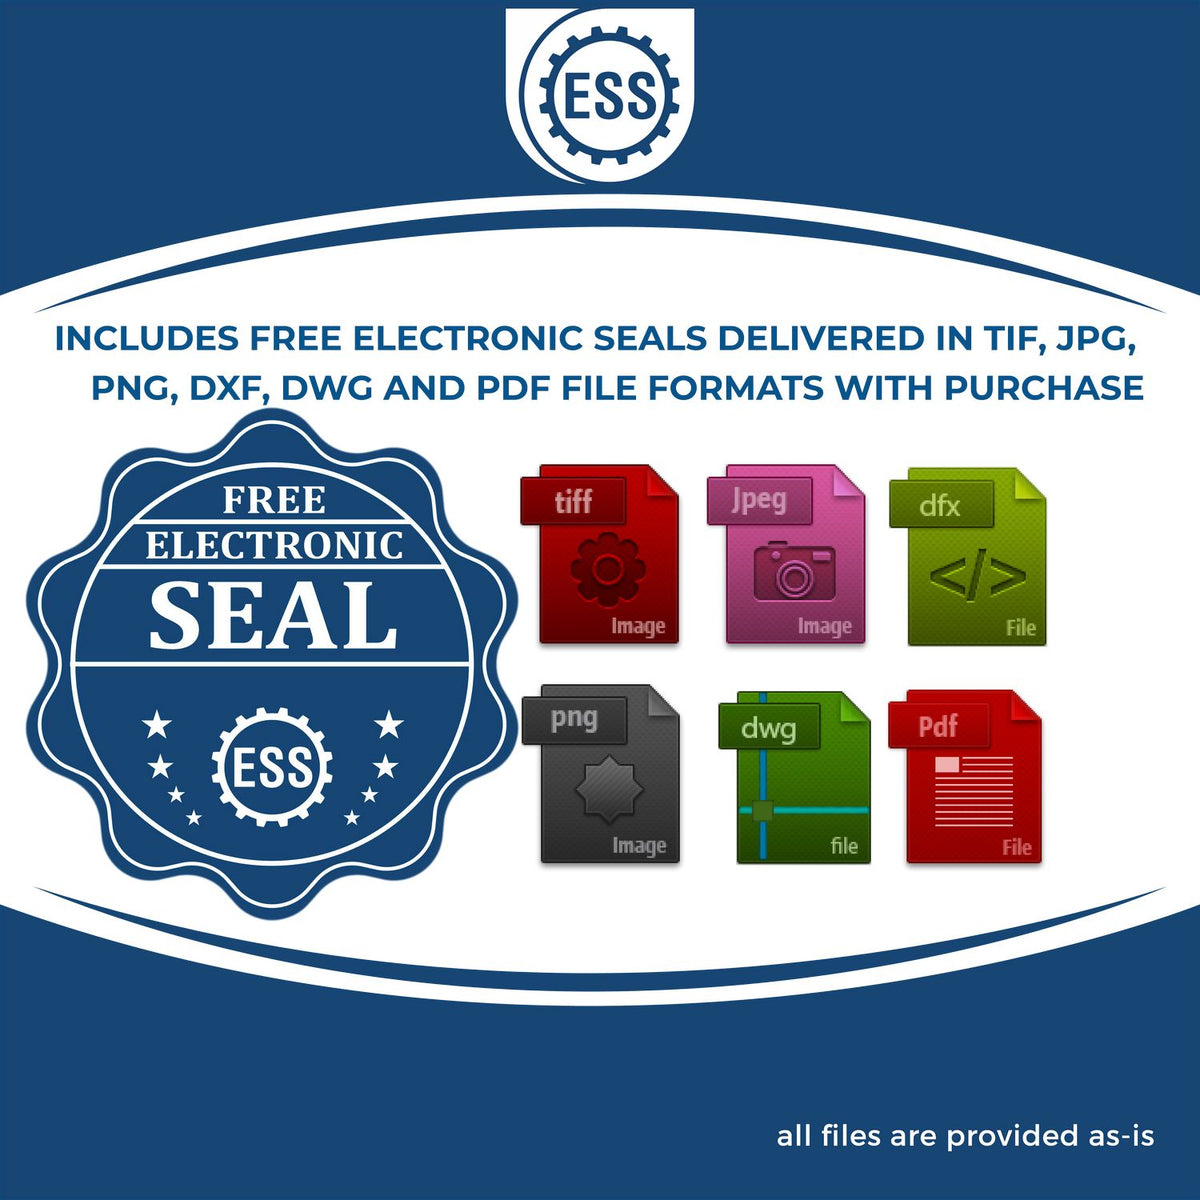 An infographic for the free electronic seal for the Hybrid Tennessee Landscape Architect Seal illustrating the different file type icons such as DXF, DWG, TIF, JPG and PNG.